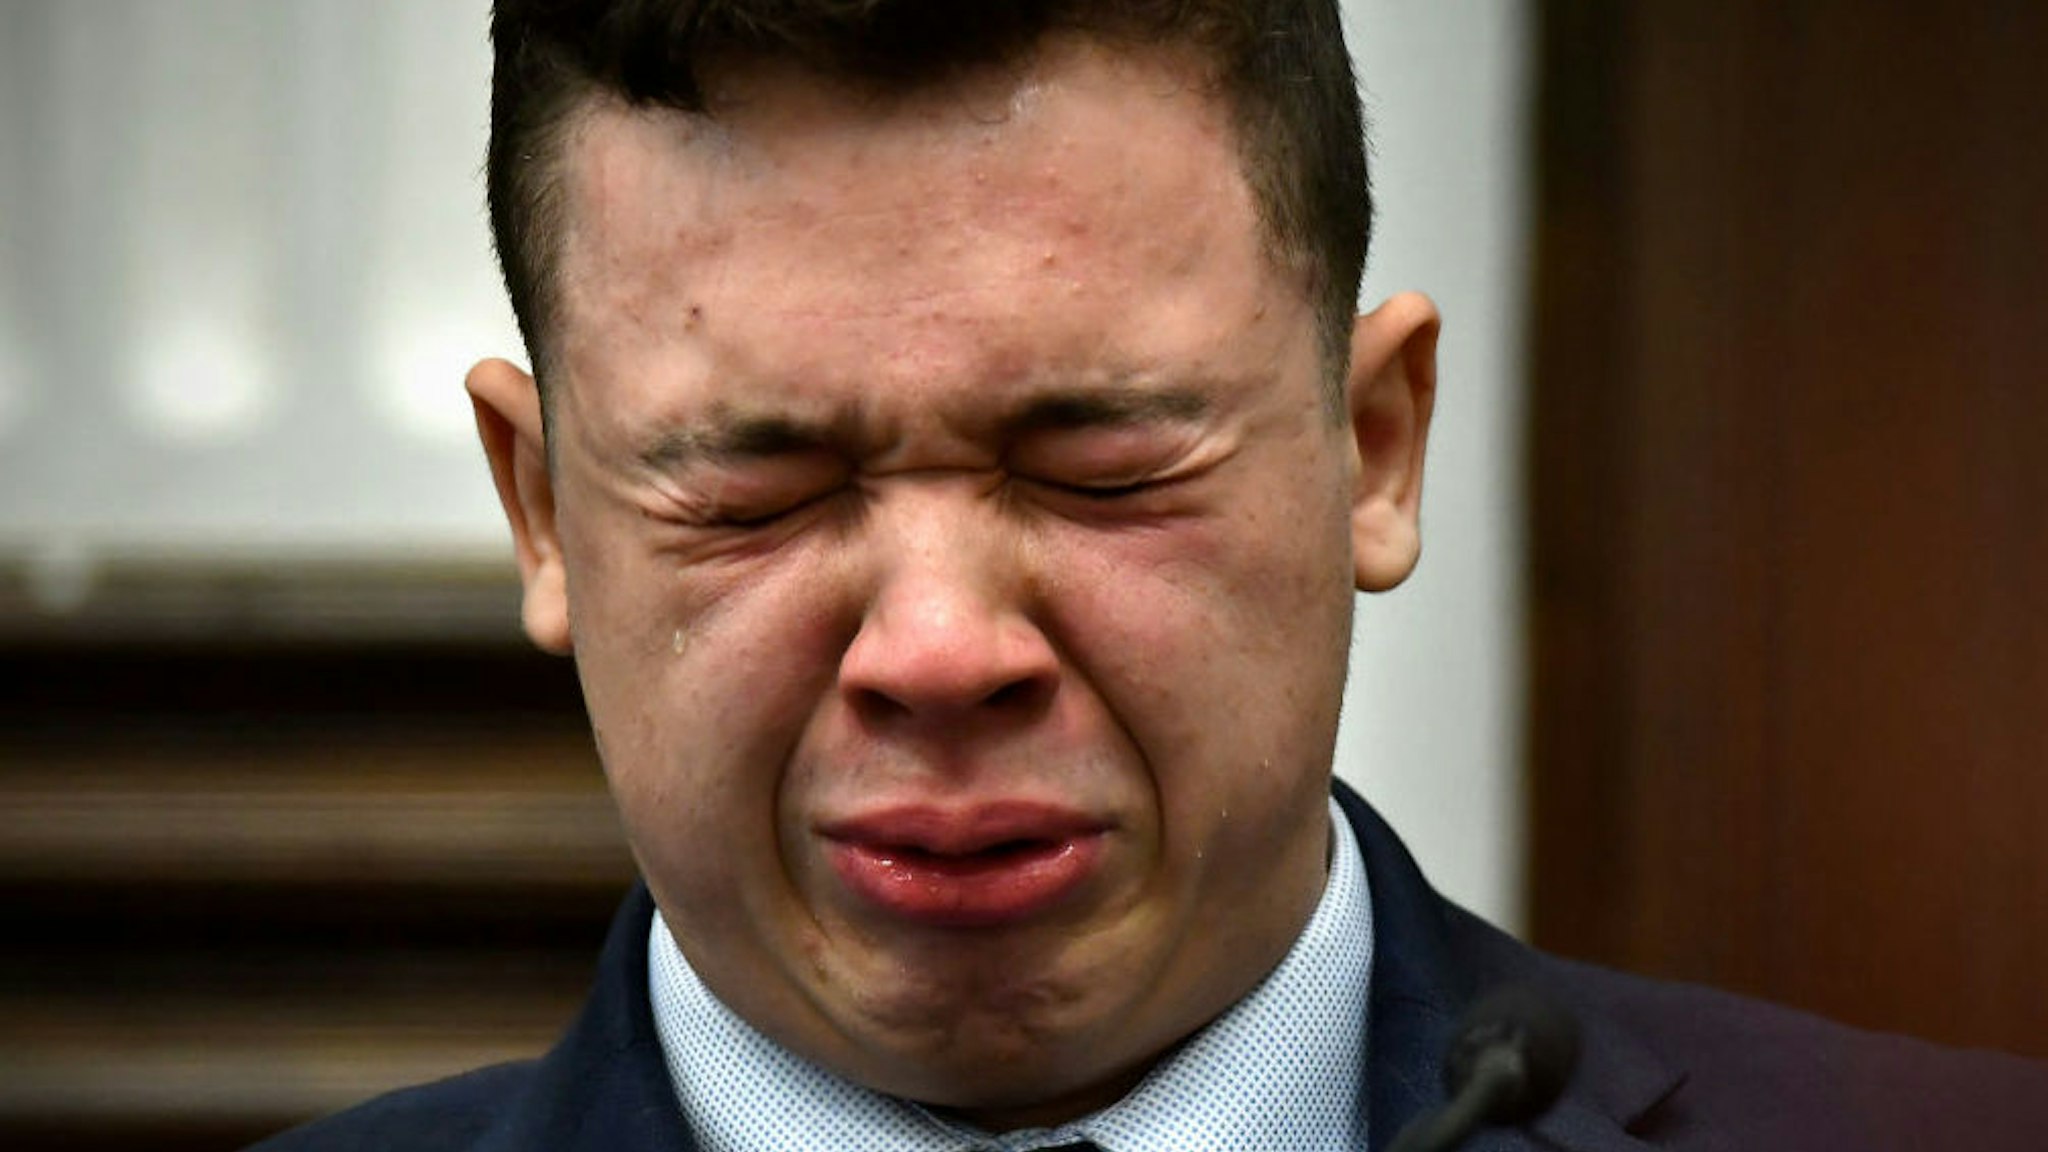 Kyle Rittenhouse breaks down on the stand as he testifies about his encounter with the late Joseph Rosenbaum during his trial at the Kenosha County Courthouse on November 10, 2021 in Kenosha, Wisconsin.